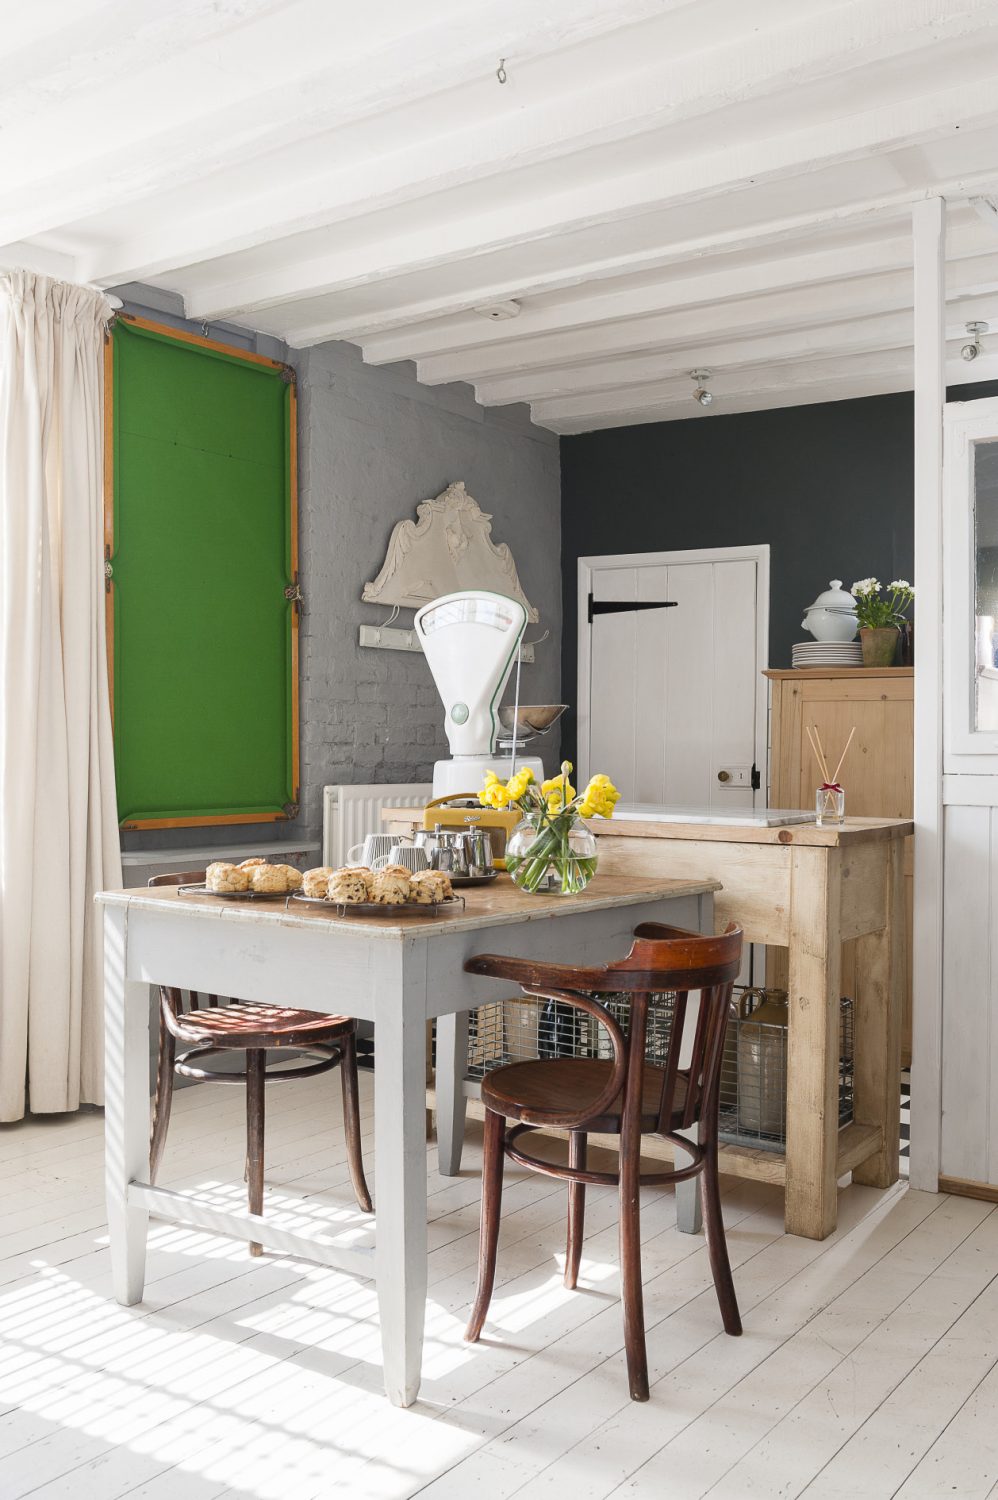 A snooker table hangs decoratively on the wall in the kitchen, bringing a splash of colour to the room, but it’s also just waiting to be taken down for a game – and, by fluke, it fits perfectly on top of the dining table